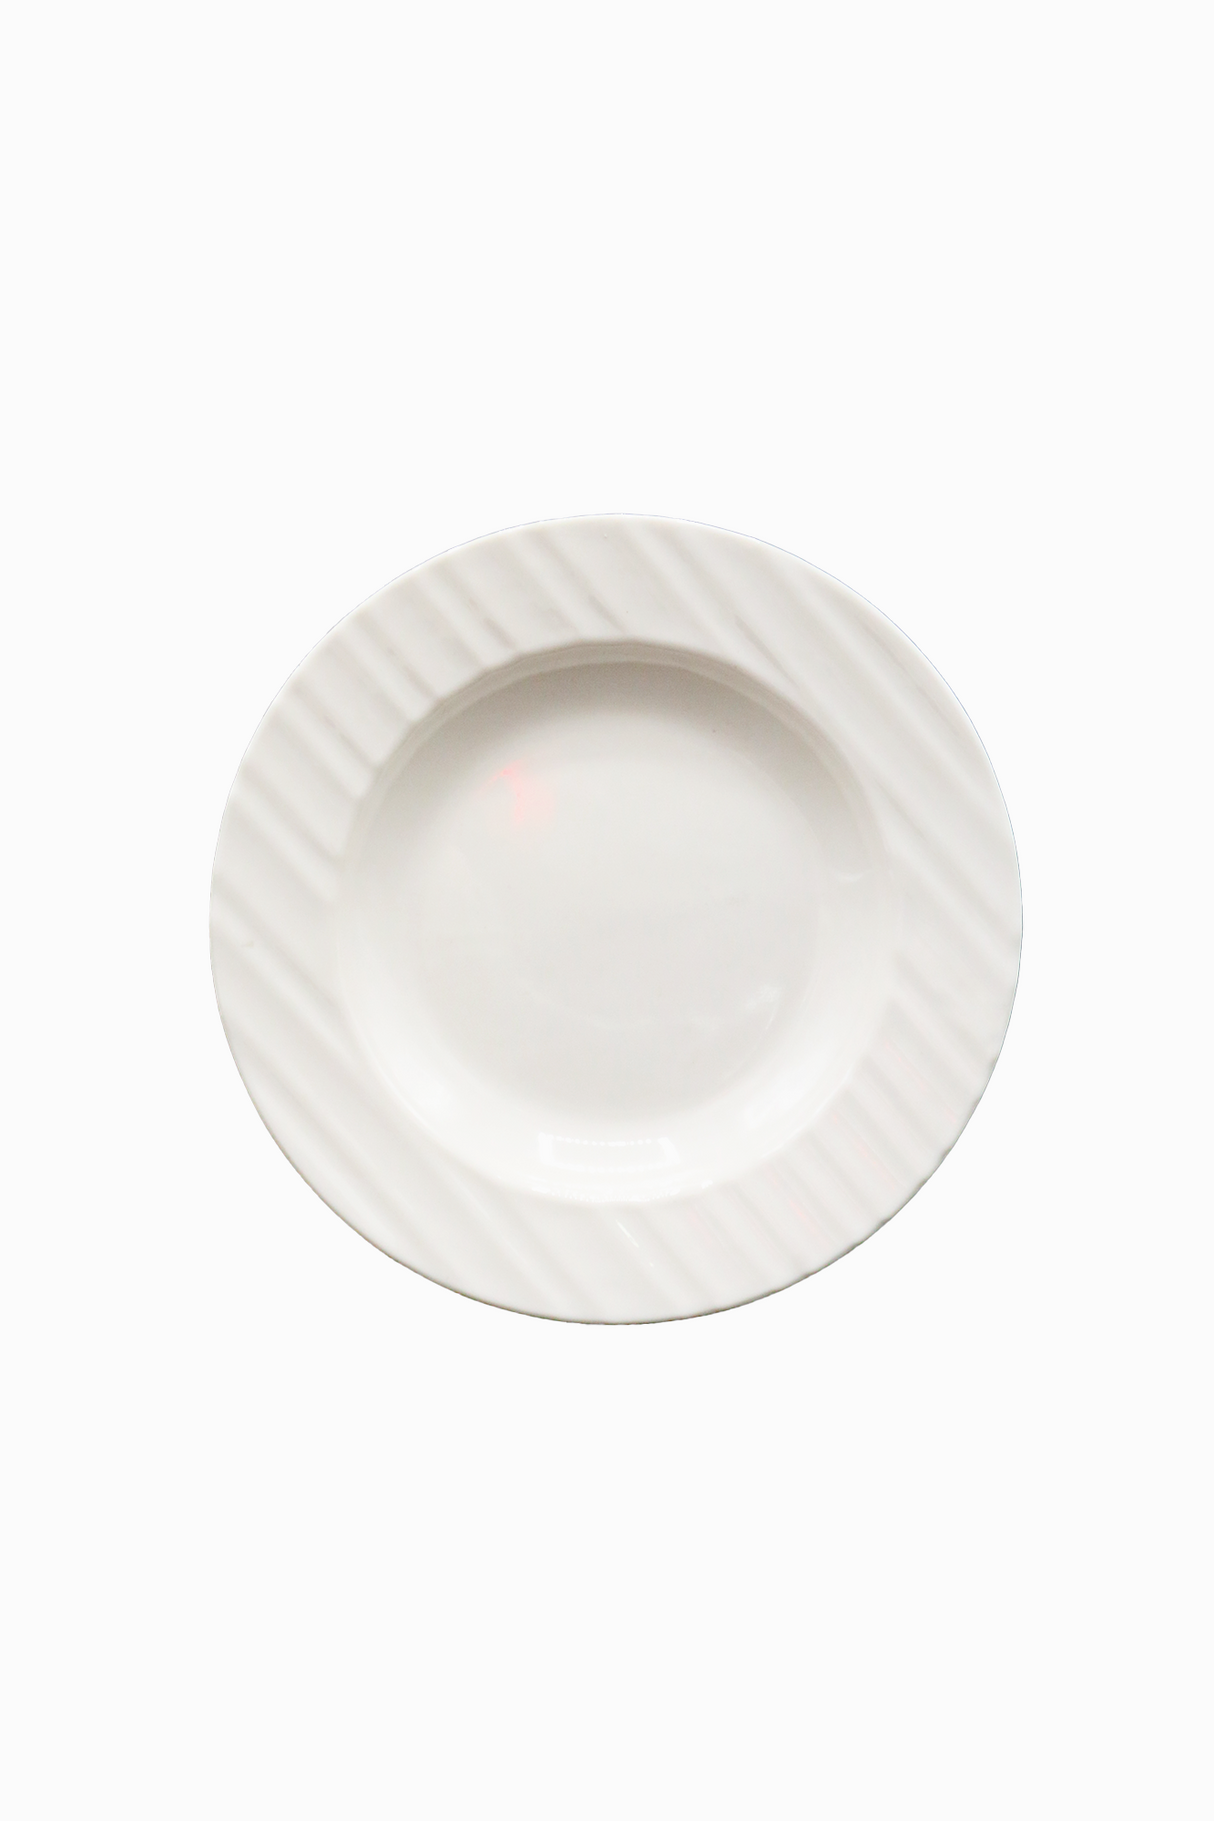 ow soup plate 9.5"